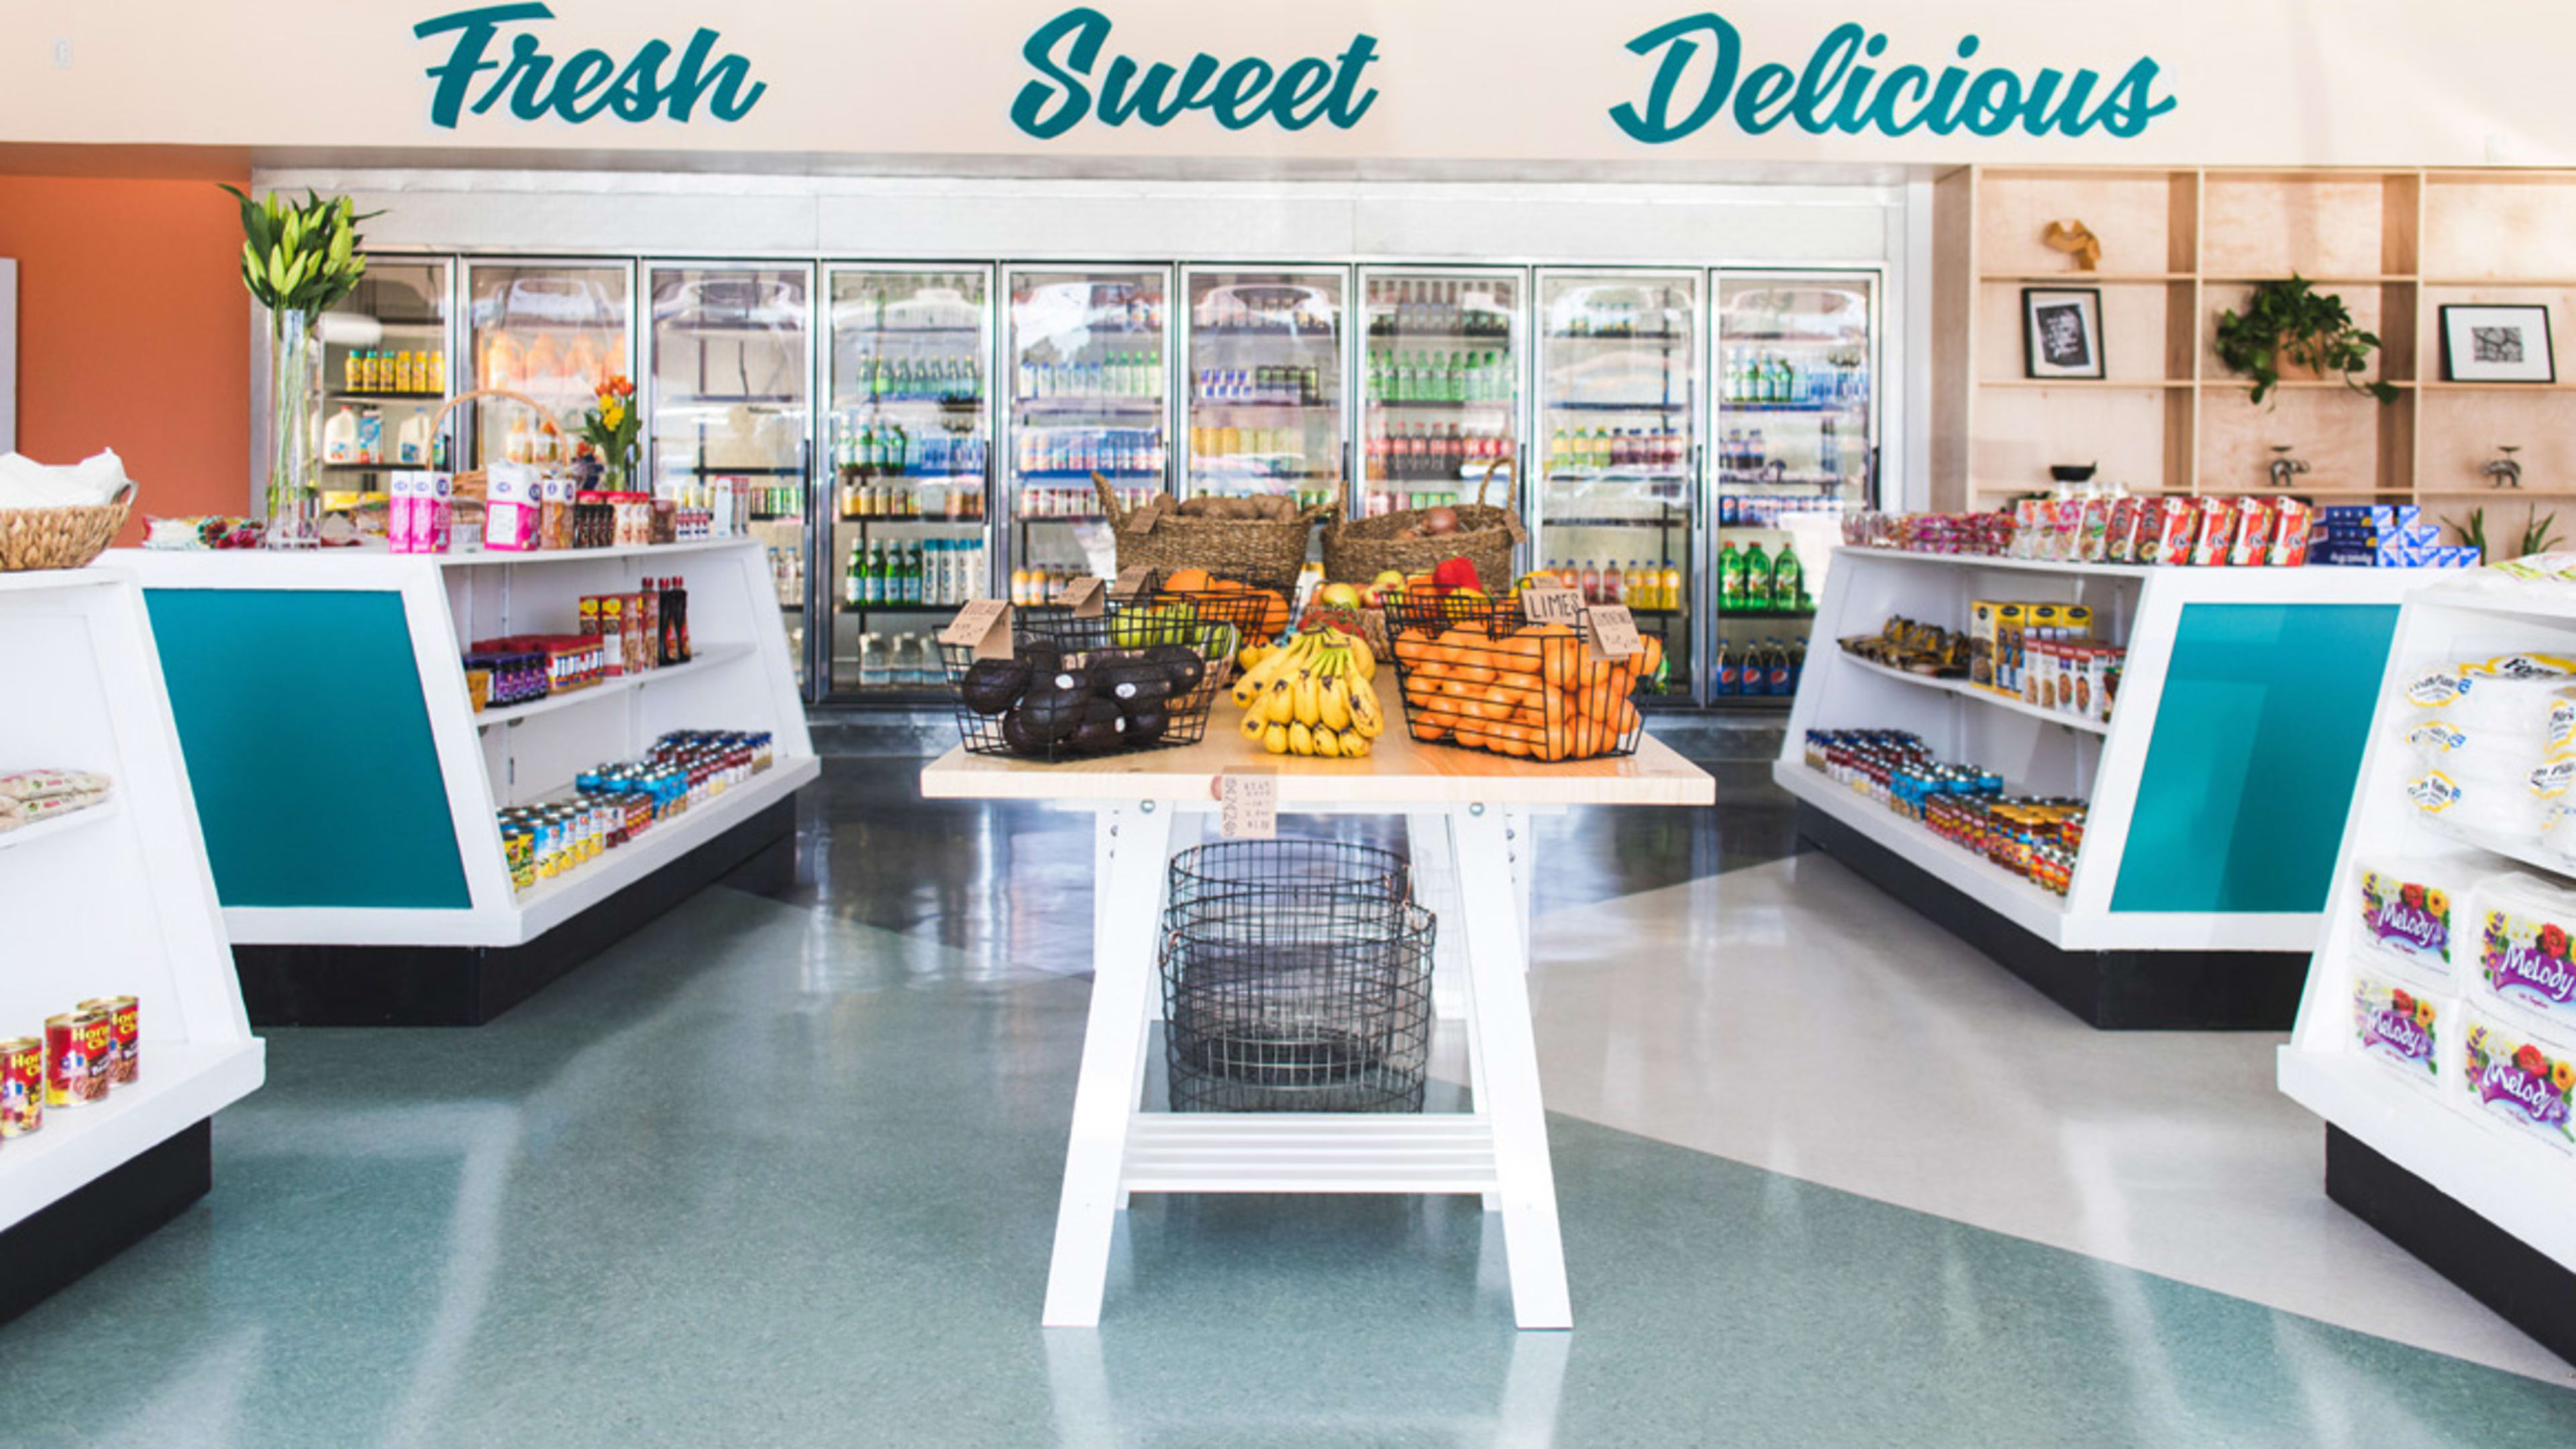 How Sweetgreen Helped This Corner Store With A Healthy Transformation